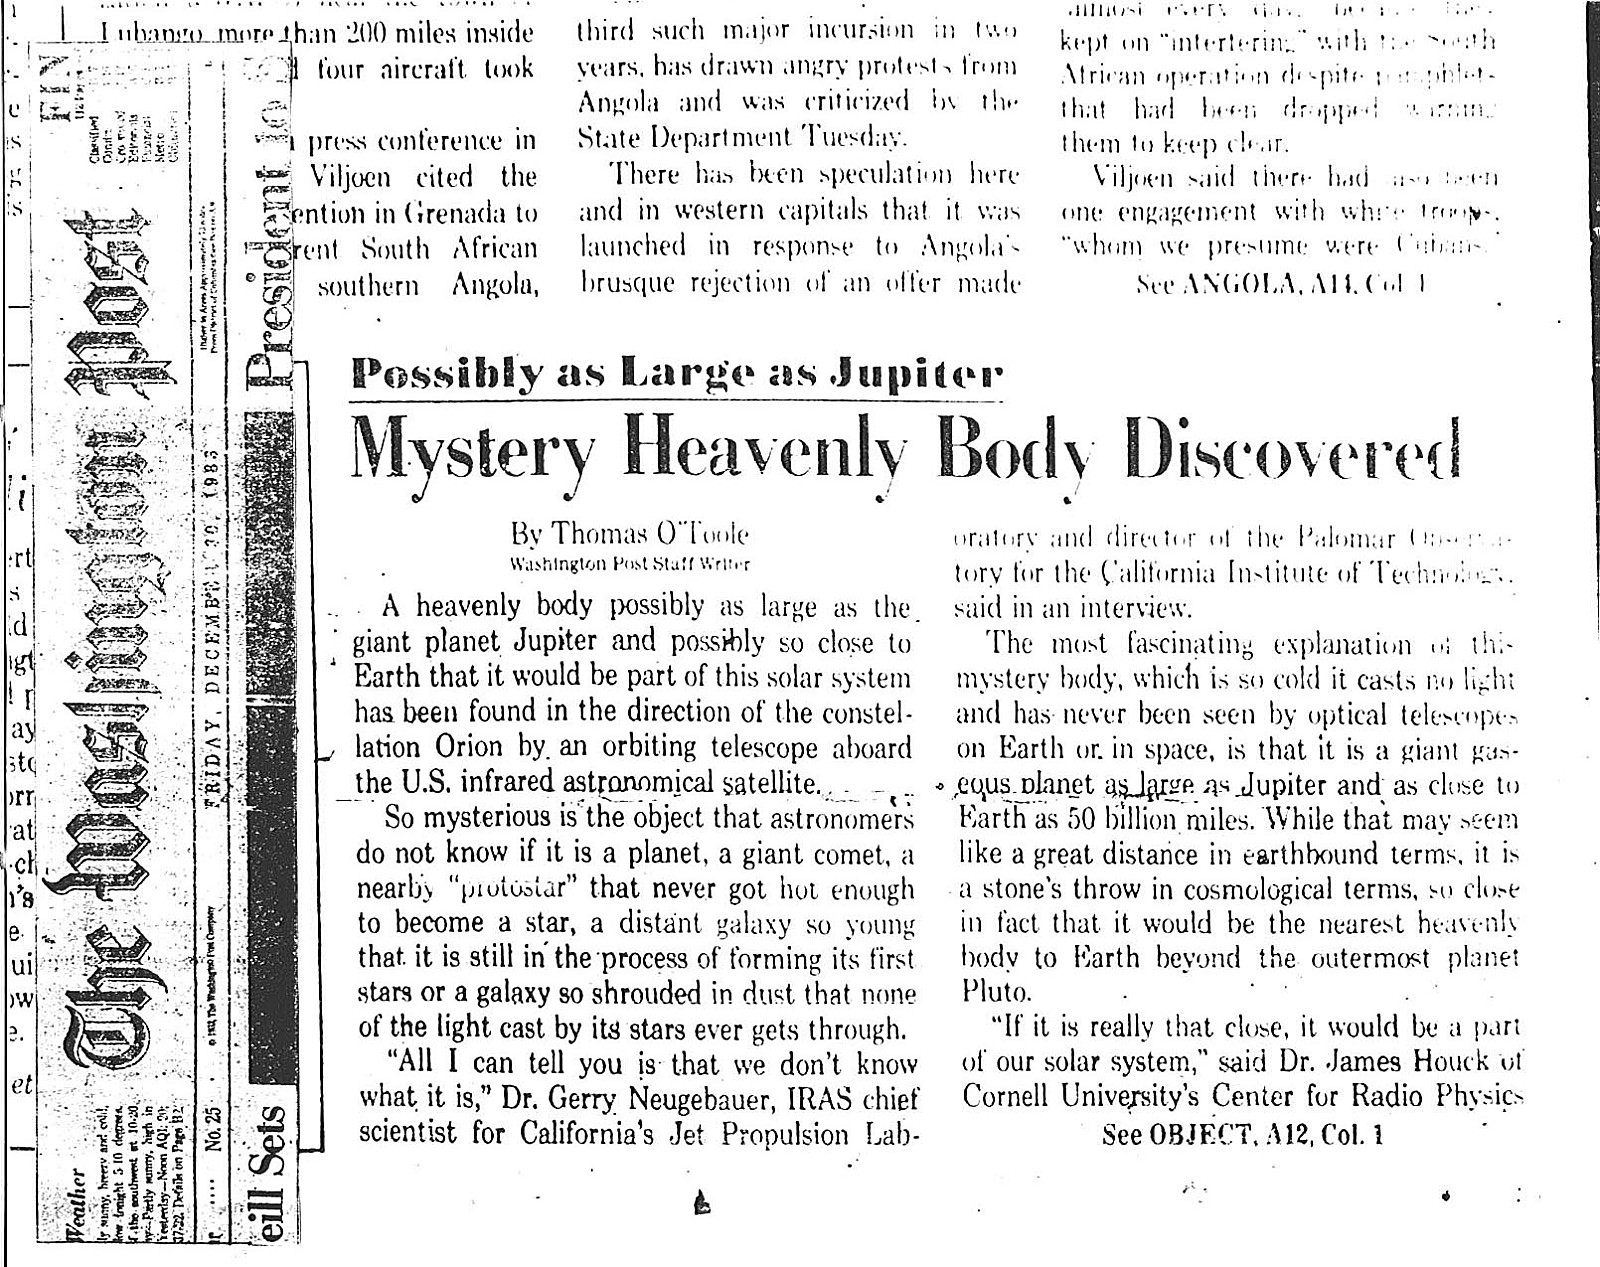 https://www.coursehero.com/file/p31bdms/Mystery-Heavenly-Body-Discovered-A-heavenly-body-possibly-as-large-as-the-giant/